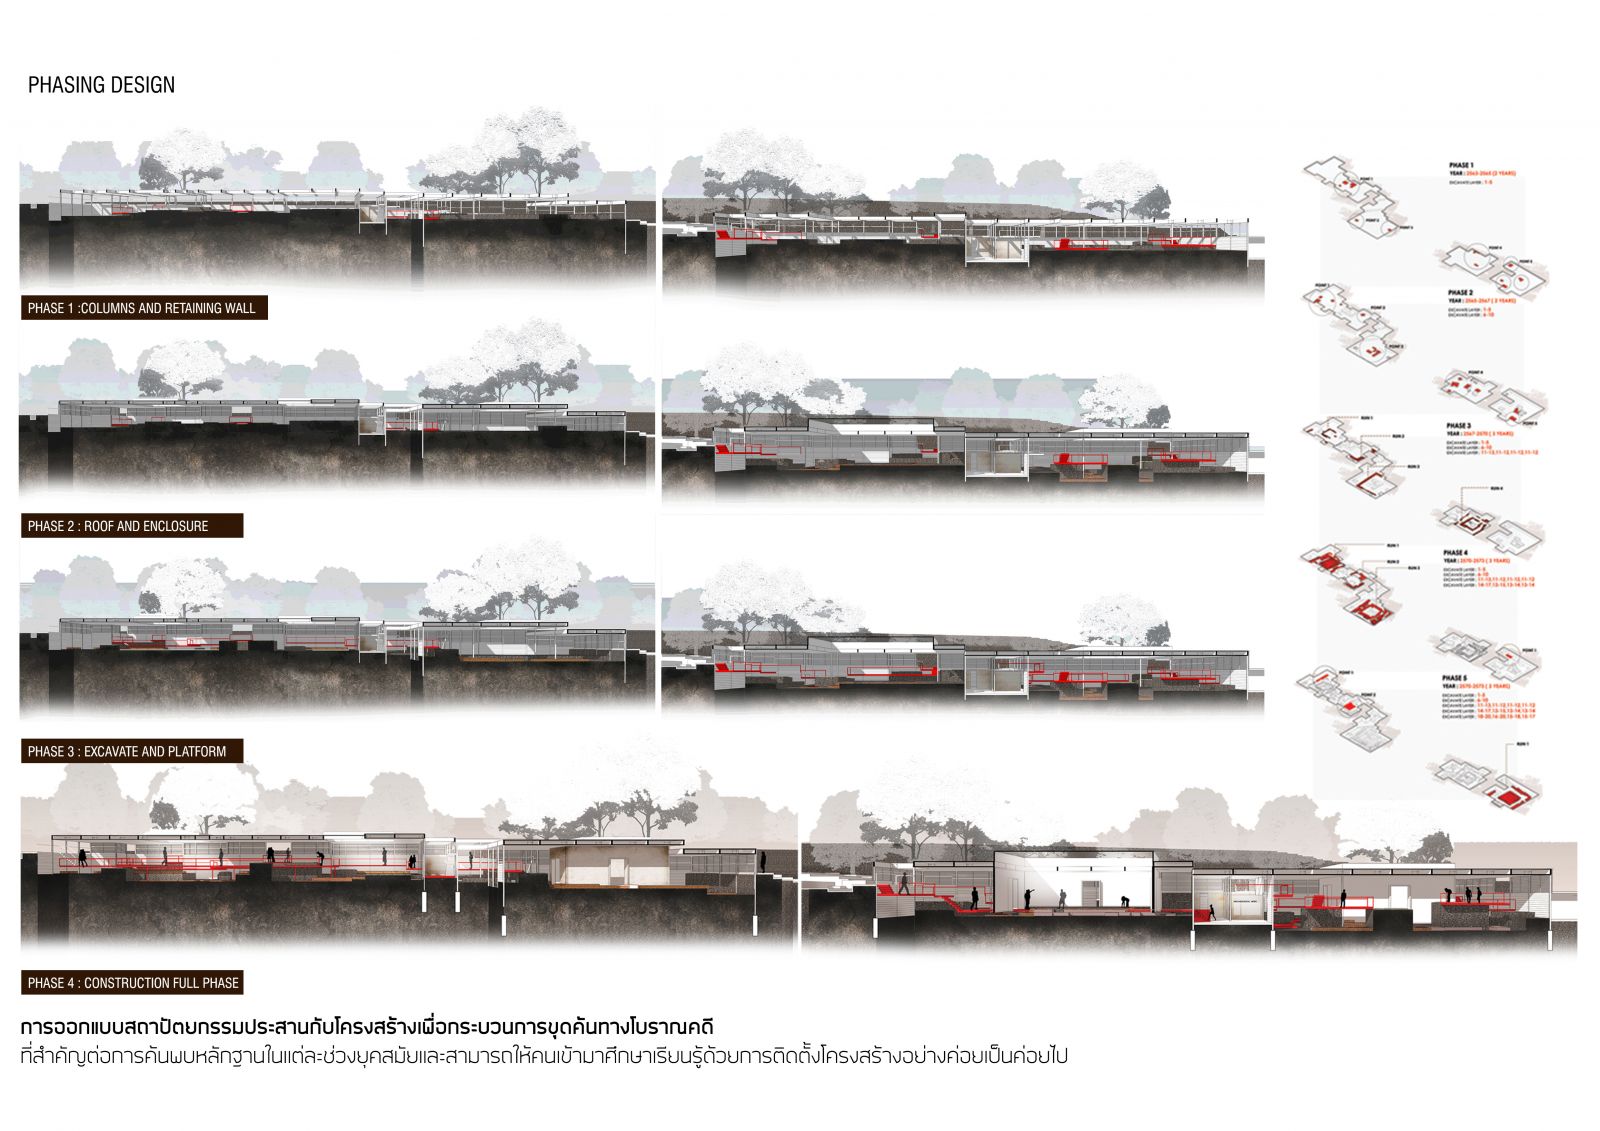 Thesis architecture archeology design archdaily design Kasetsart University awards degree show